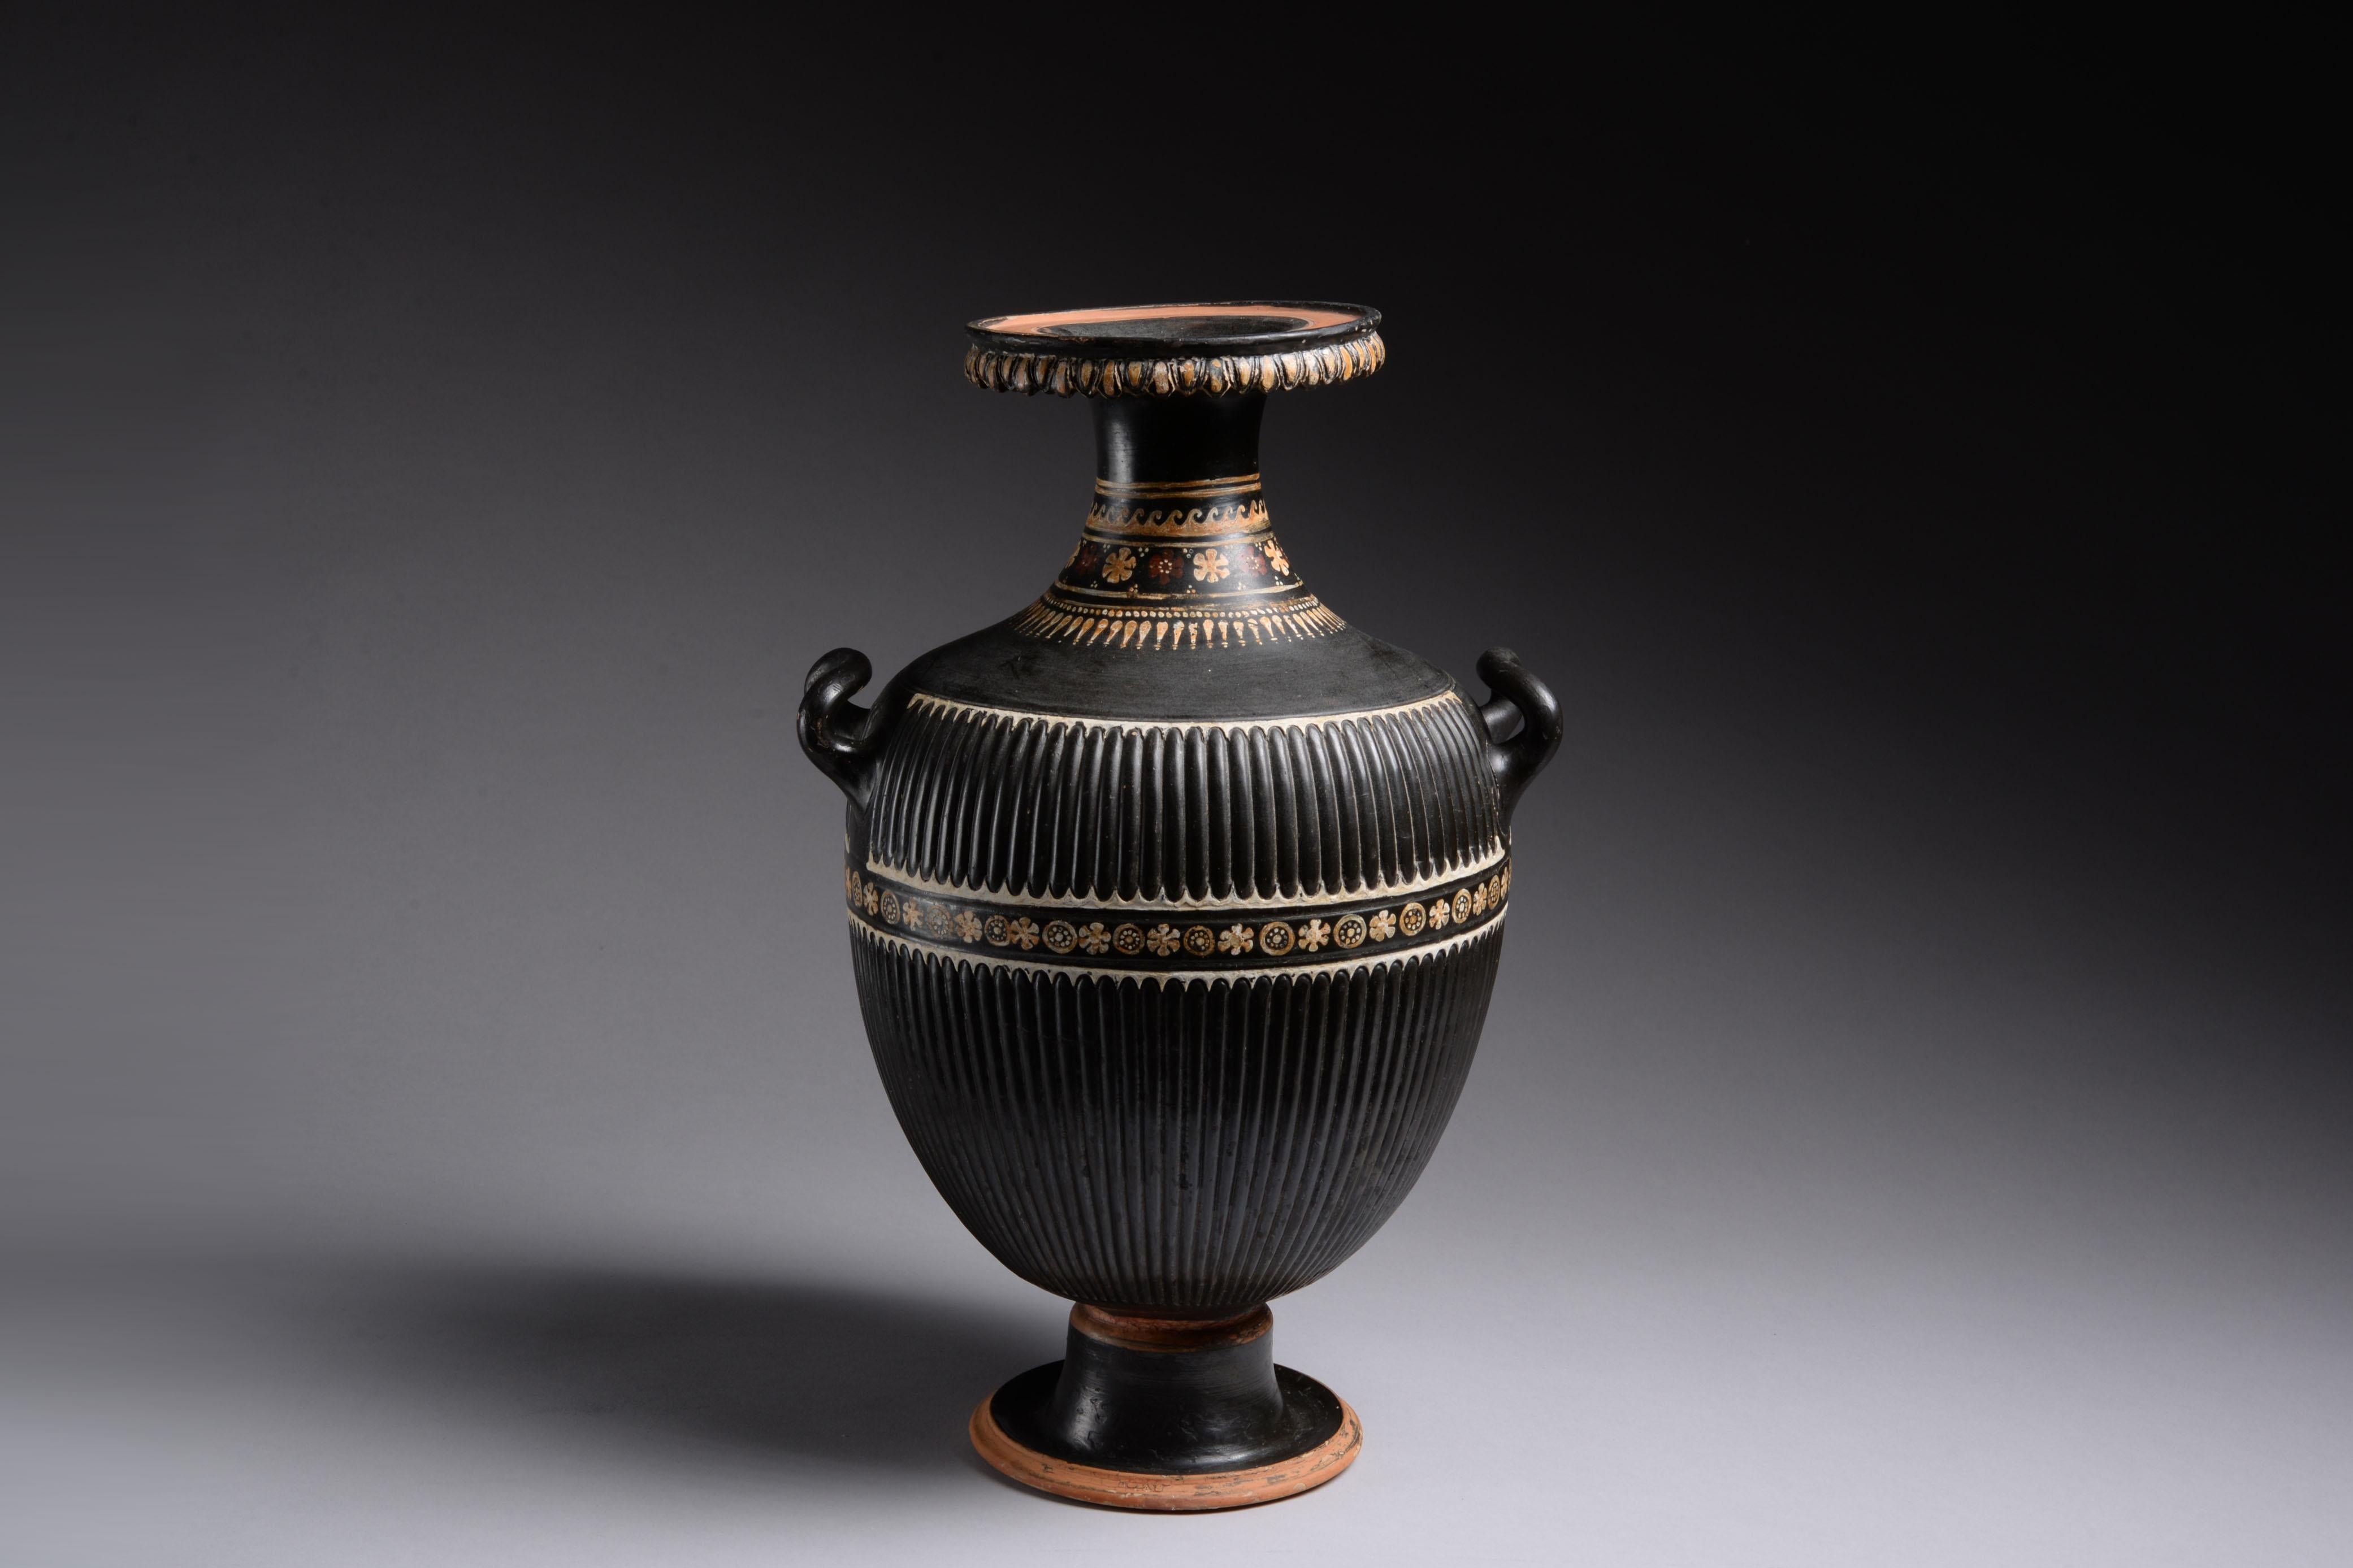 Apulian Gnathia-Ware Hydria
Circa 4th Century B.C.

“The Gnathia vases, with their beautiful simple forms ... are amongst the few desirable manifestations of Greek pottery of [this period.]” 
Emil Hannover, Pottery and Porcelain: A Handbook for